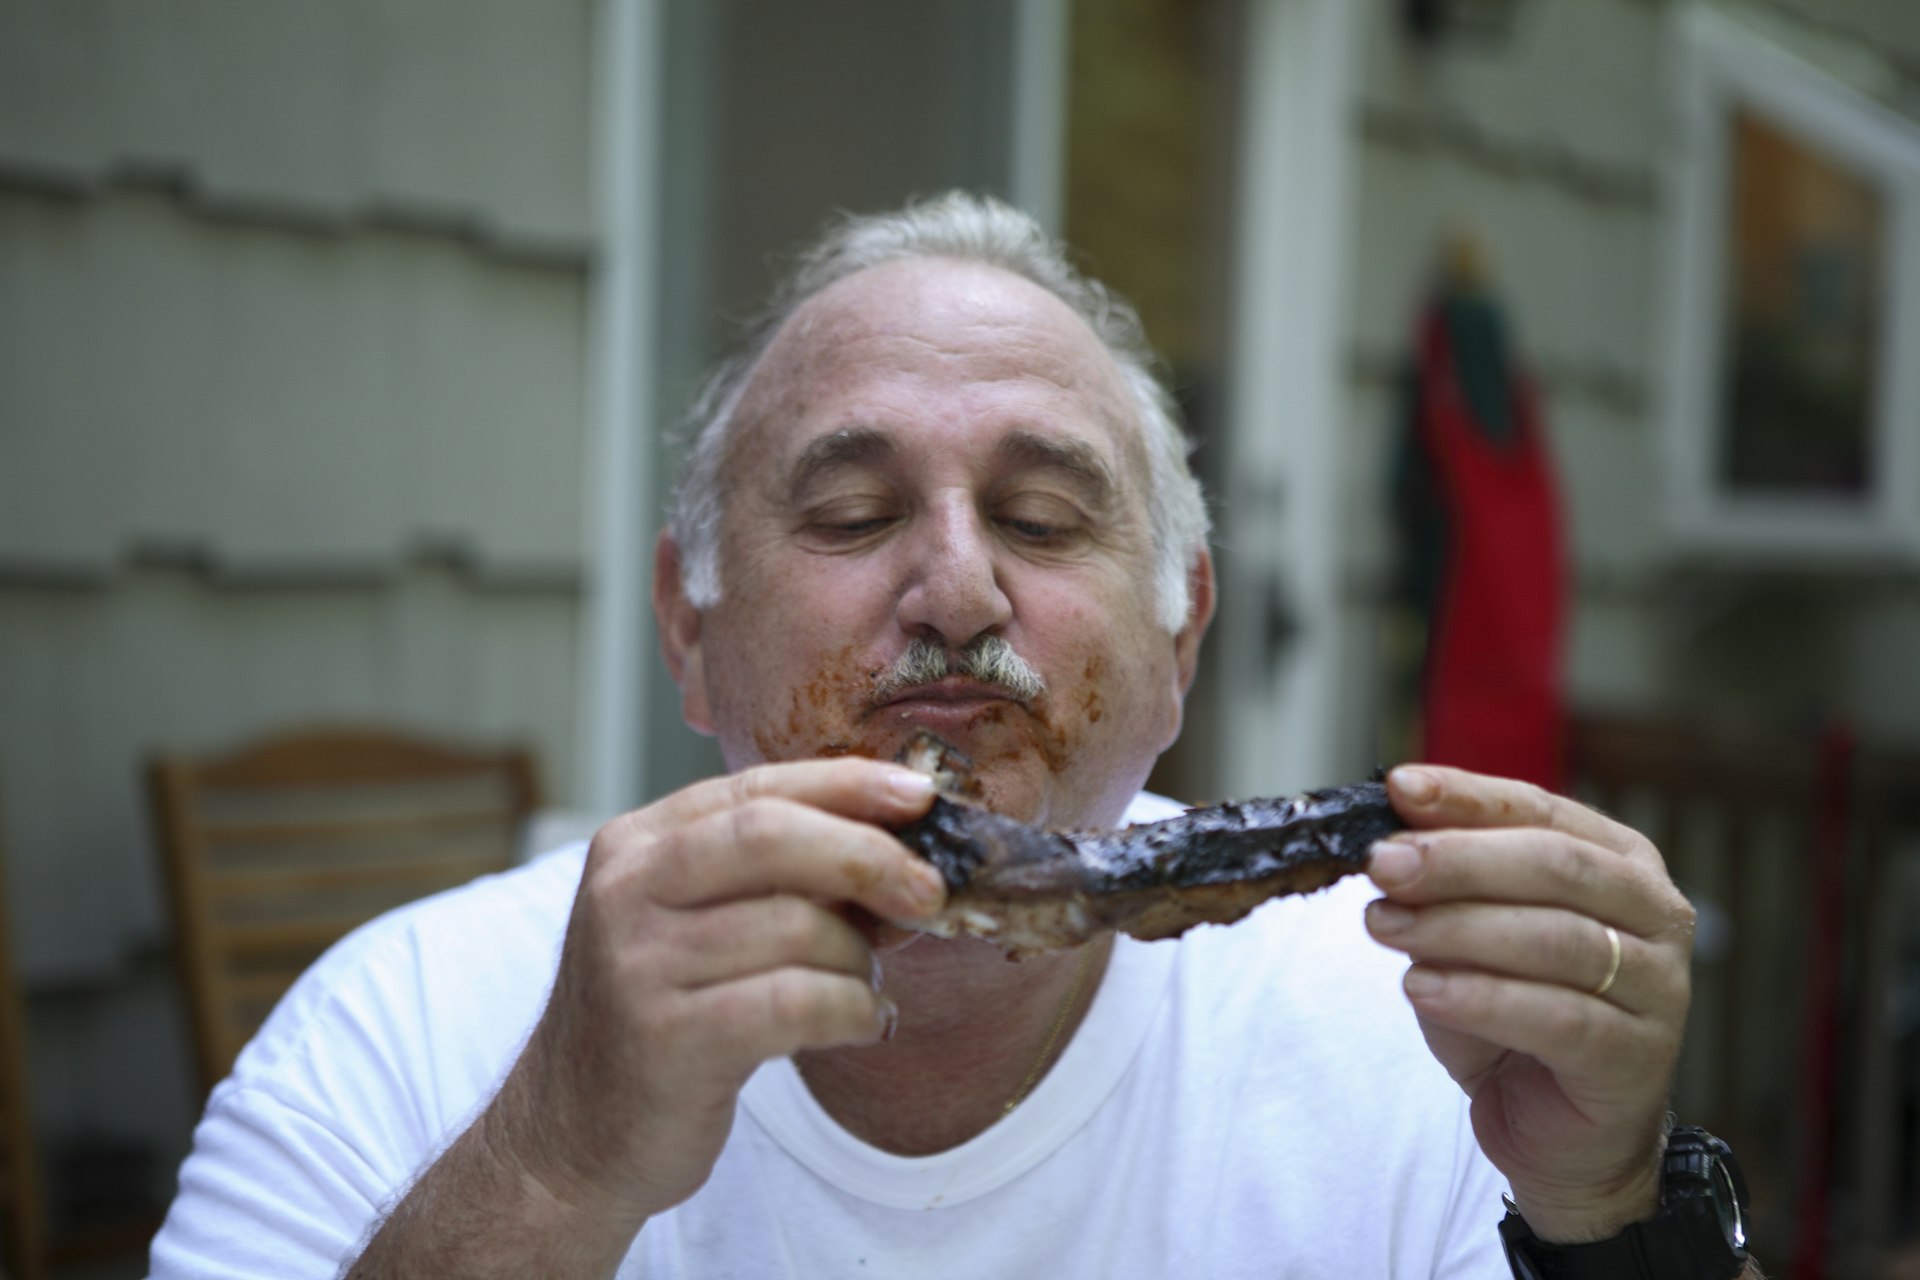 Man messily eating steak covered in sauce